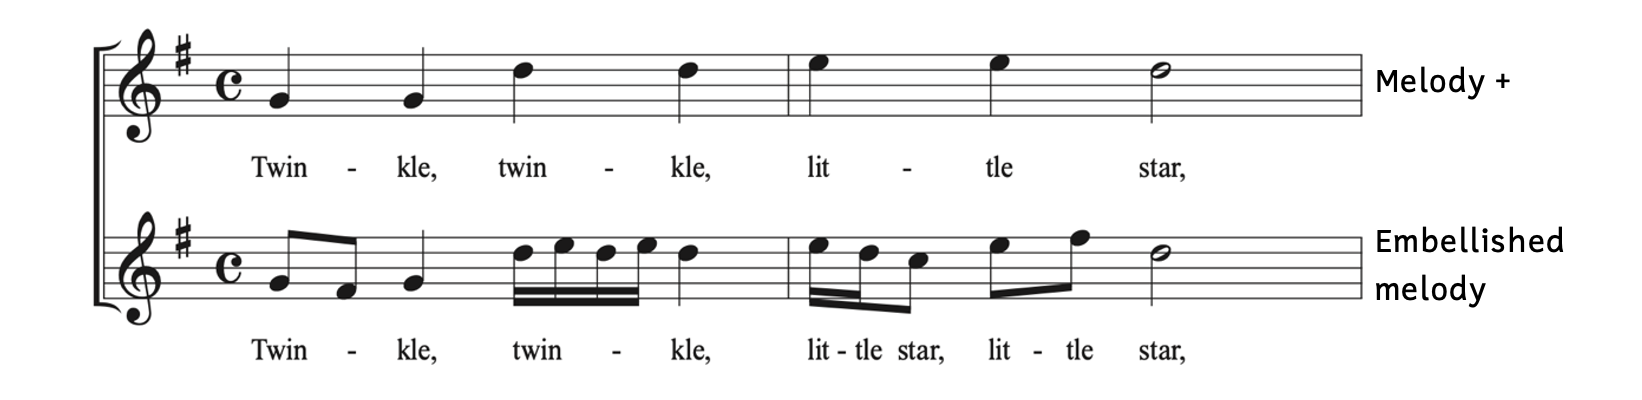 Example of heterophony with the same melody in two voices. The bottom voice has added embellishments.